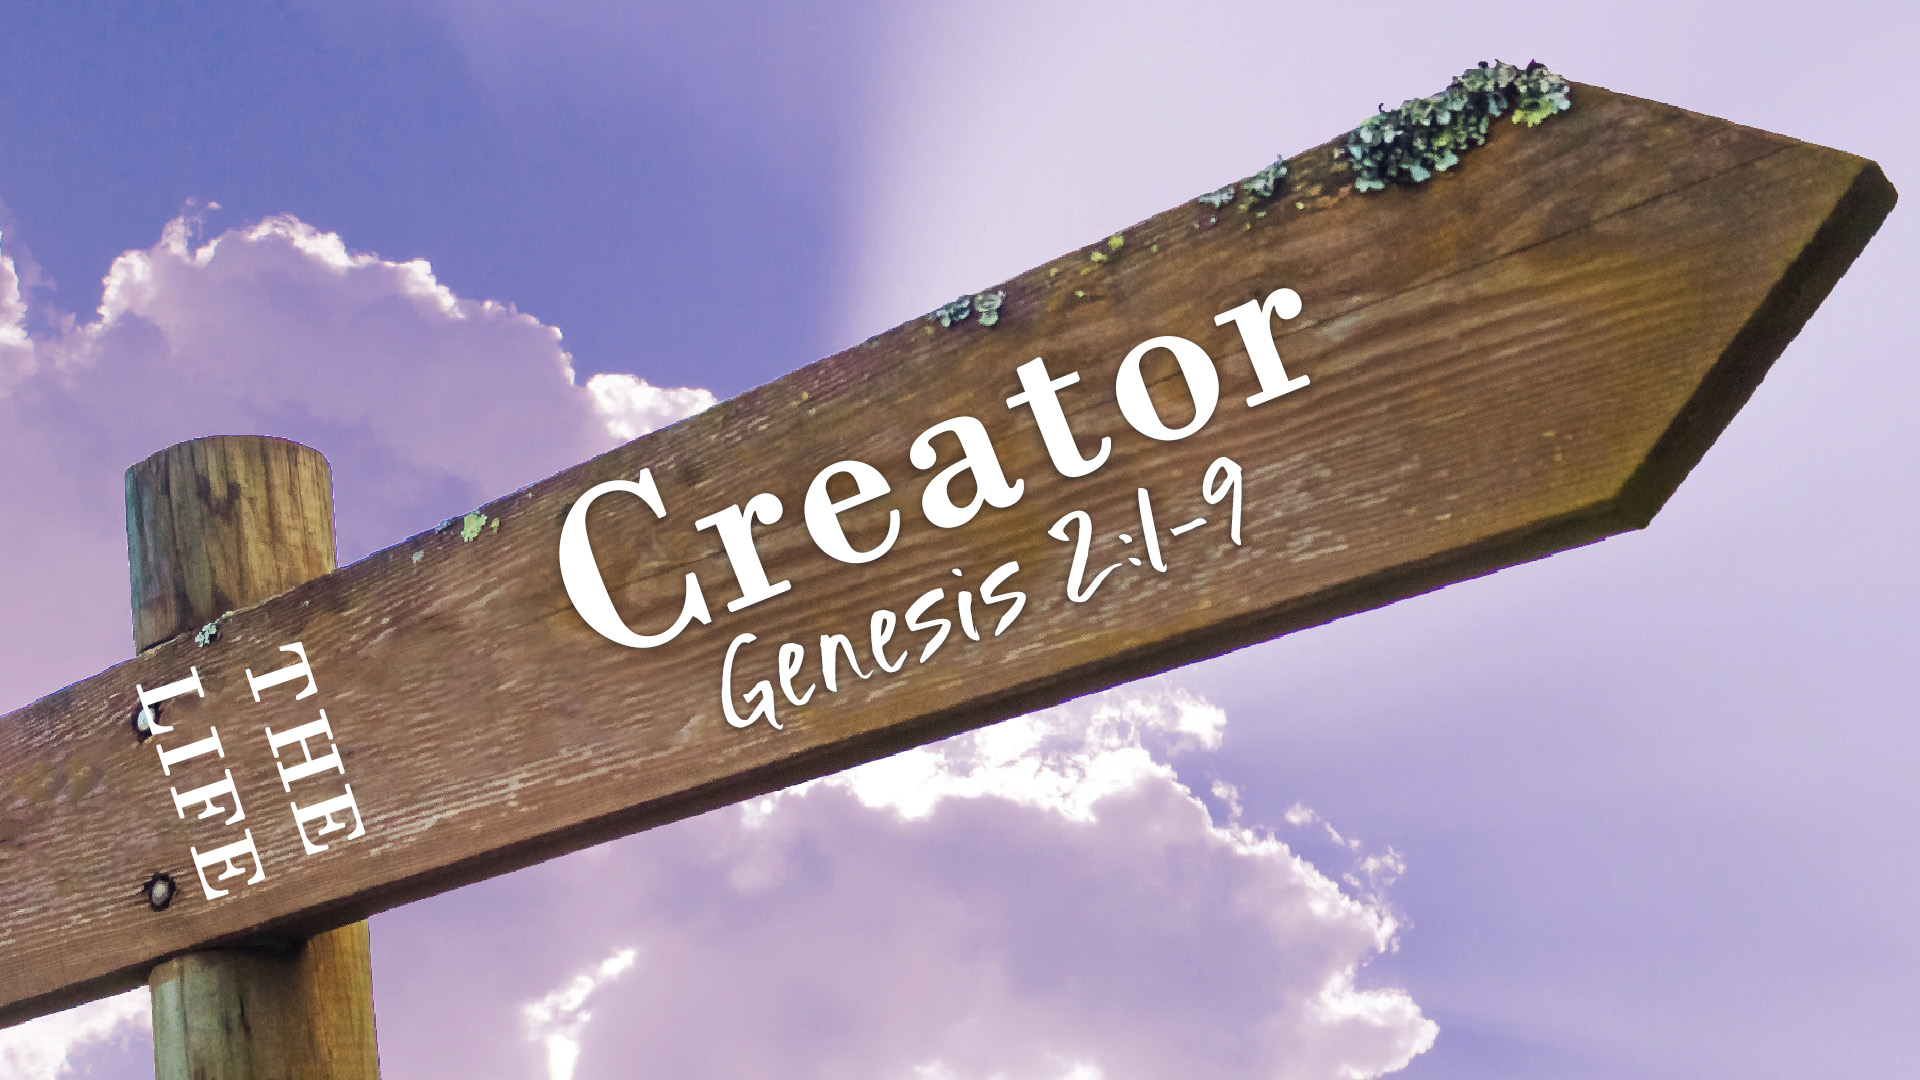 The Life, part 1: Creator 